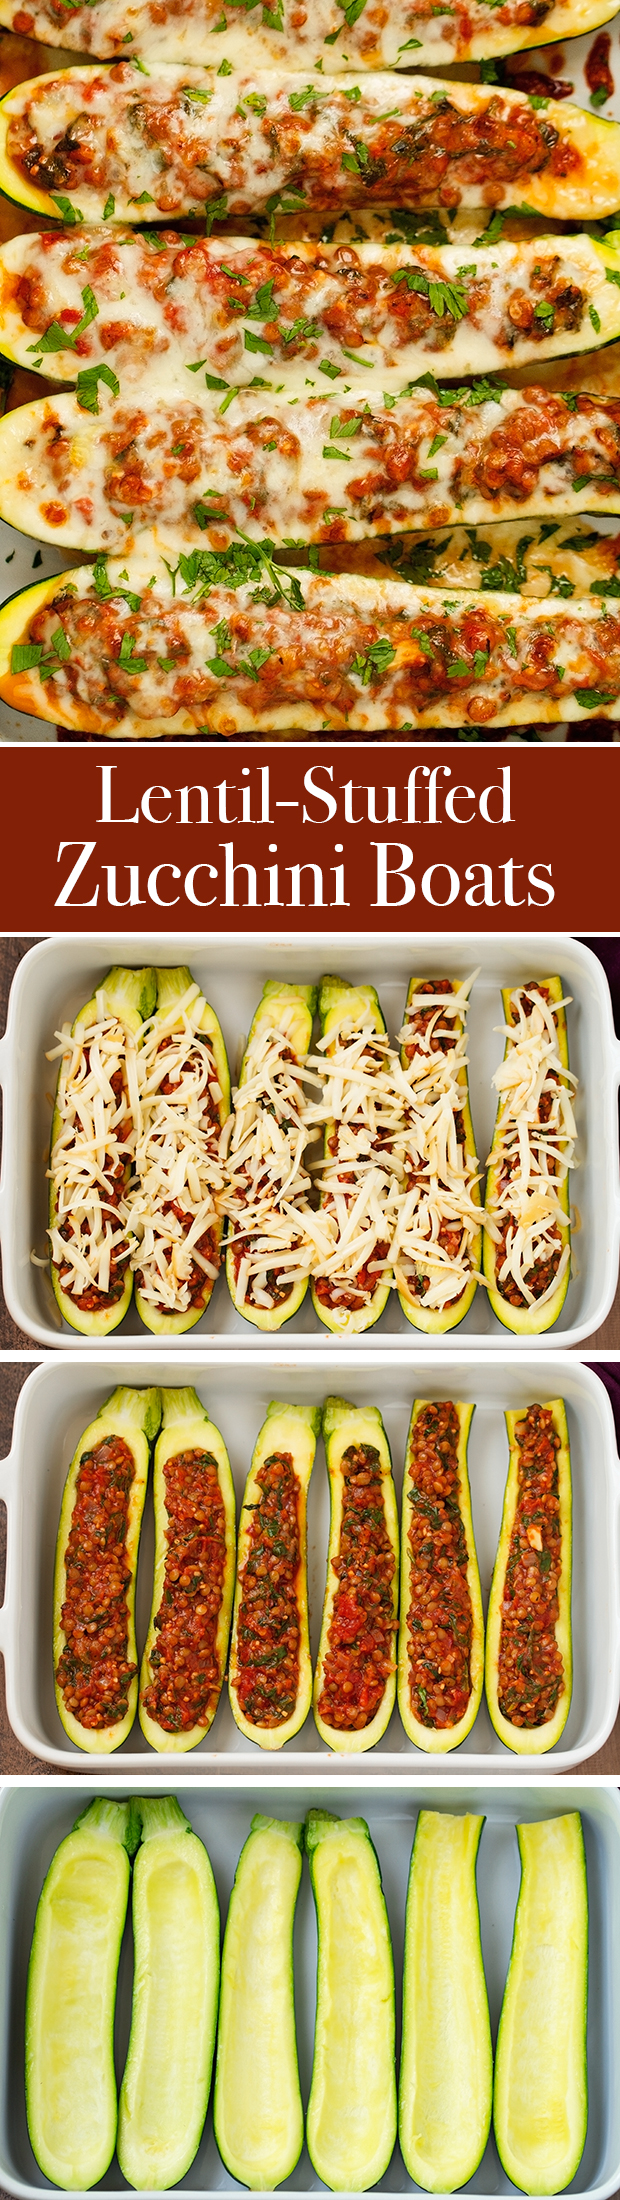 Lentil Stuffed Zucchini Boats - Less than 115 calories per boat and a whopping 8 grams of protein! These are so easy and delicous! #vegetarian #zucchiniboats #stuffedzucchiniboats | Littlespicejar.com @littlespicejar